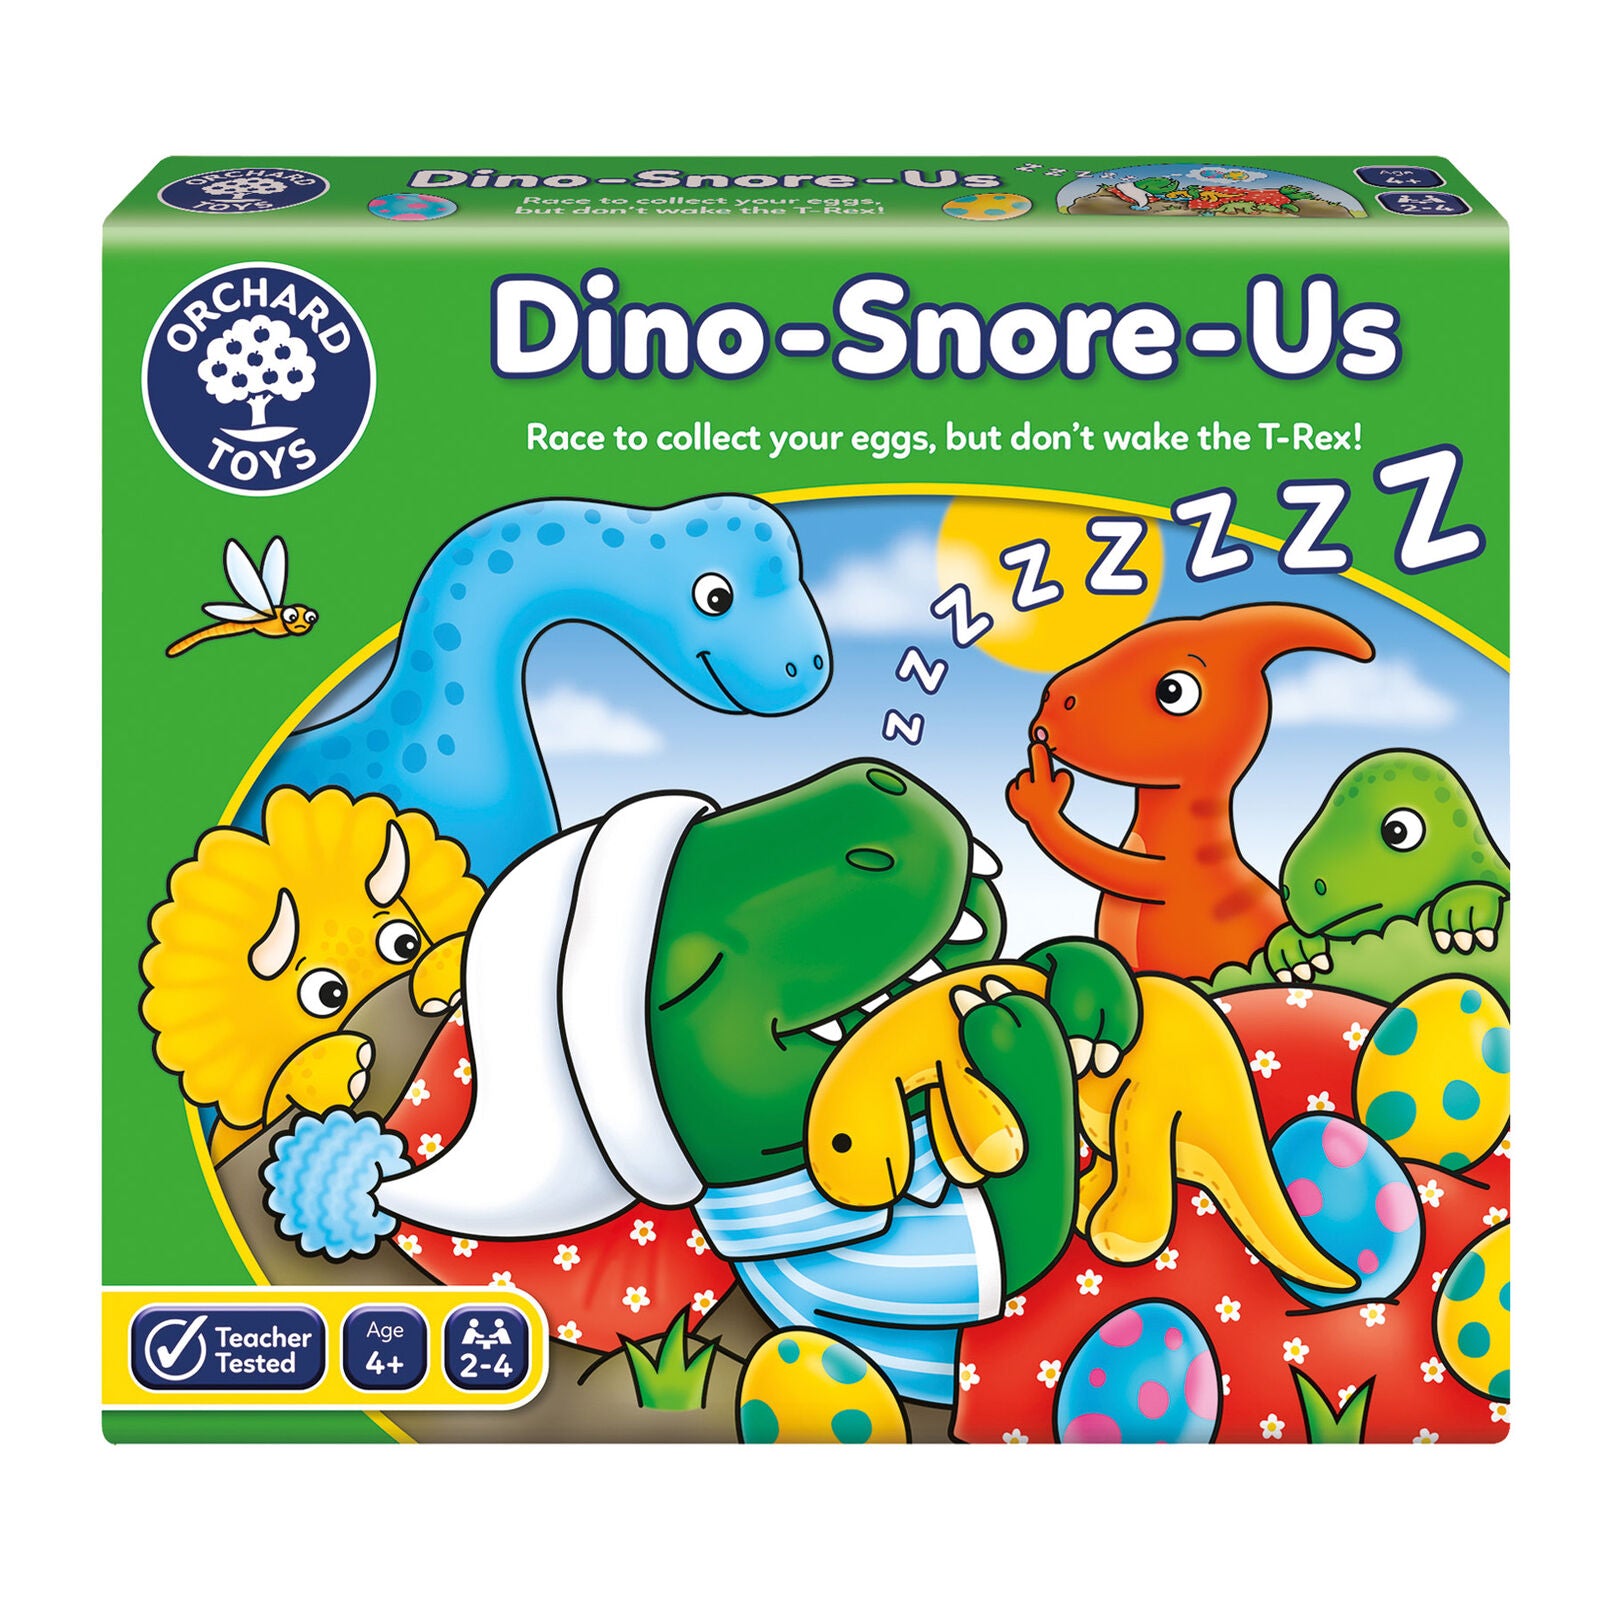 Orchard Toys 108 Dino-Snore-Us Counting Board Game Family Children Age 4+